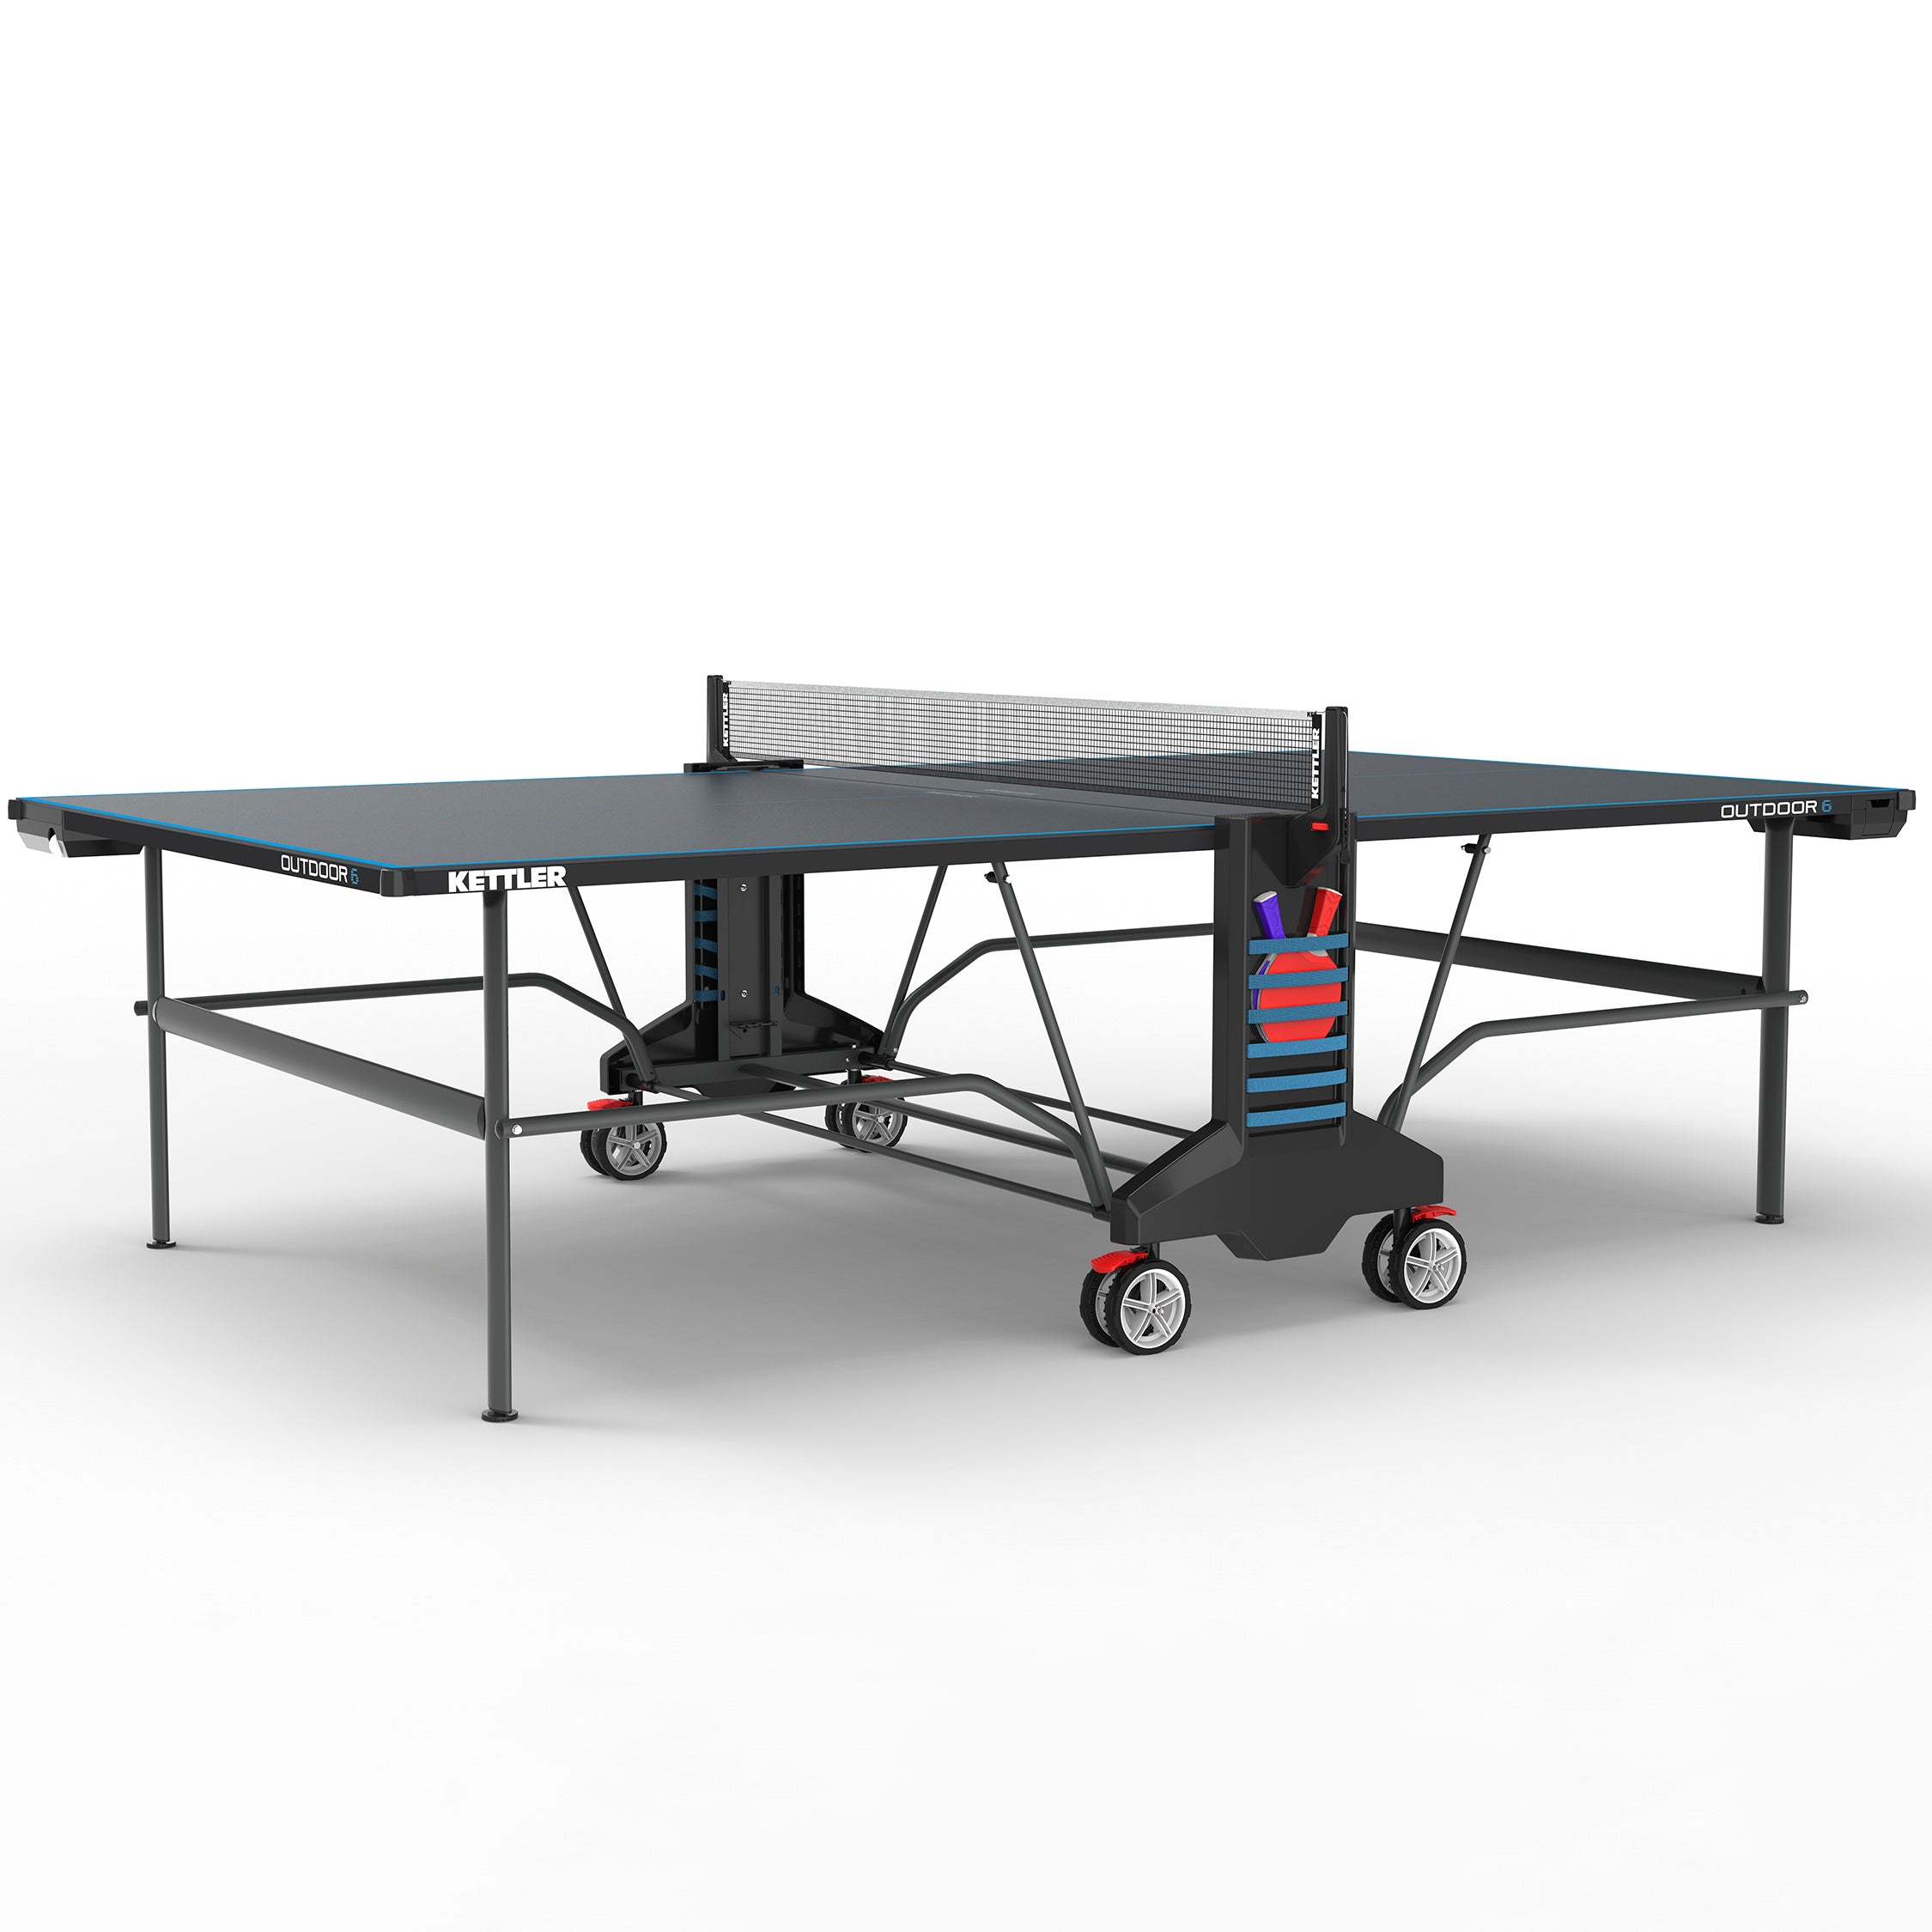 Designed in Germany outdoor table tennis table in play position  